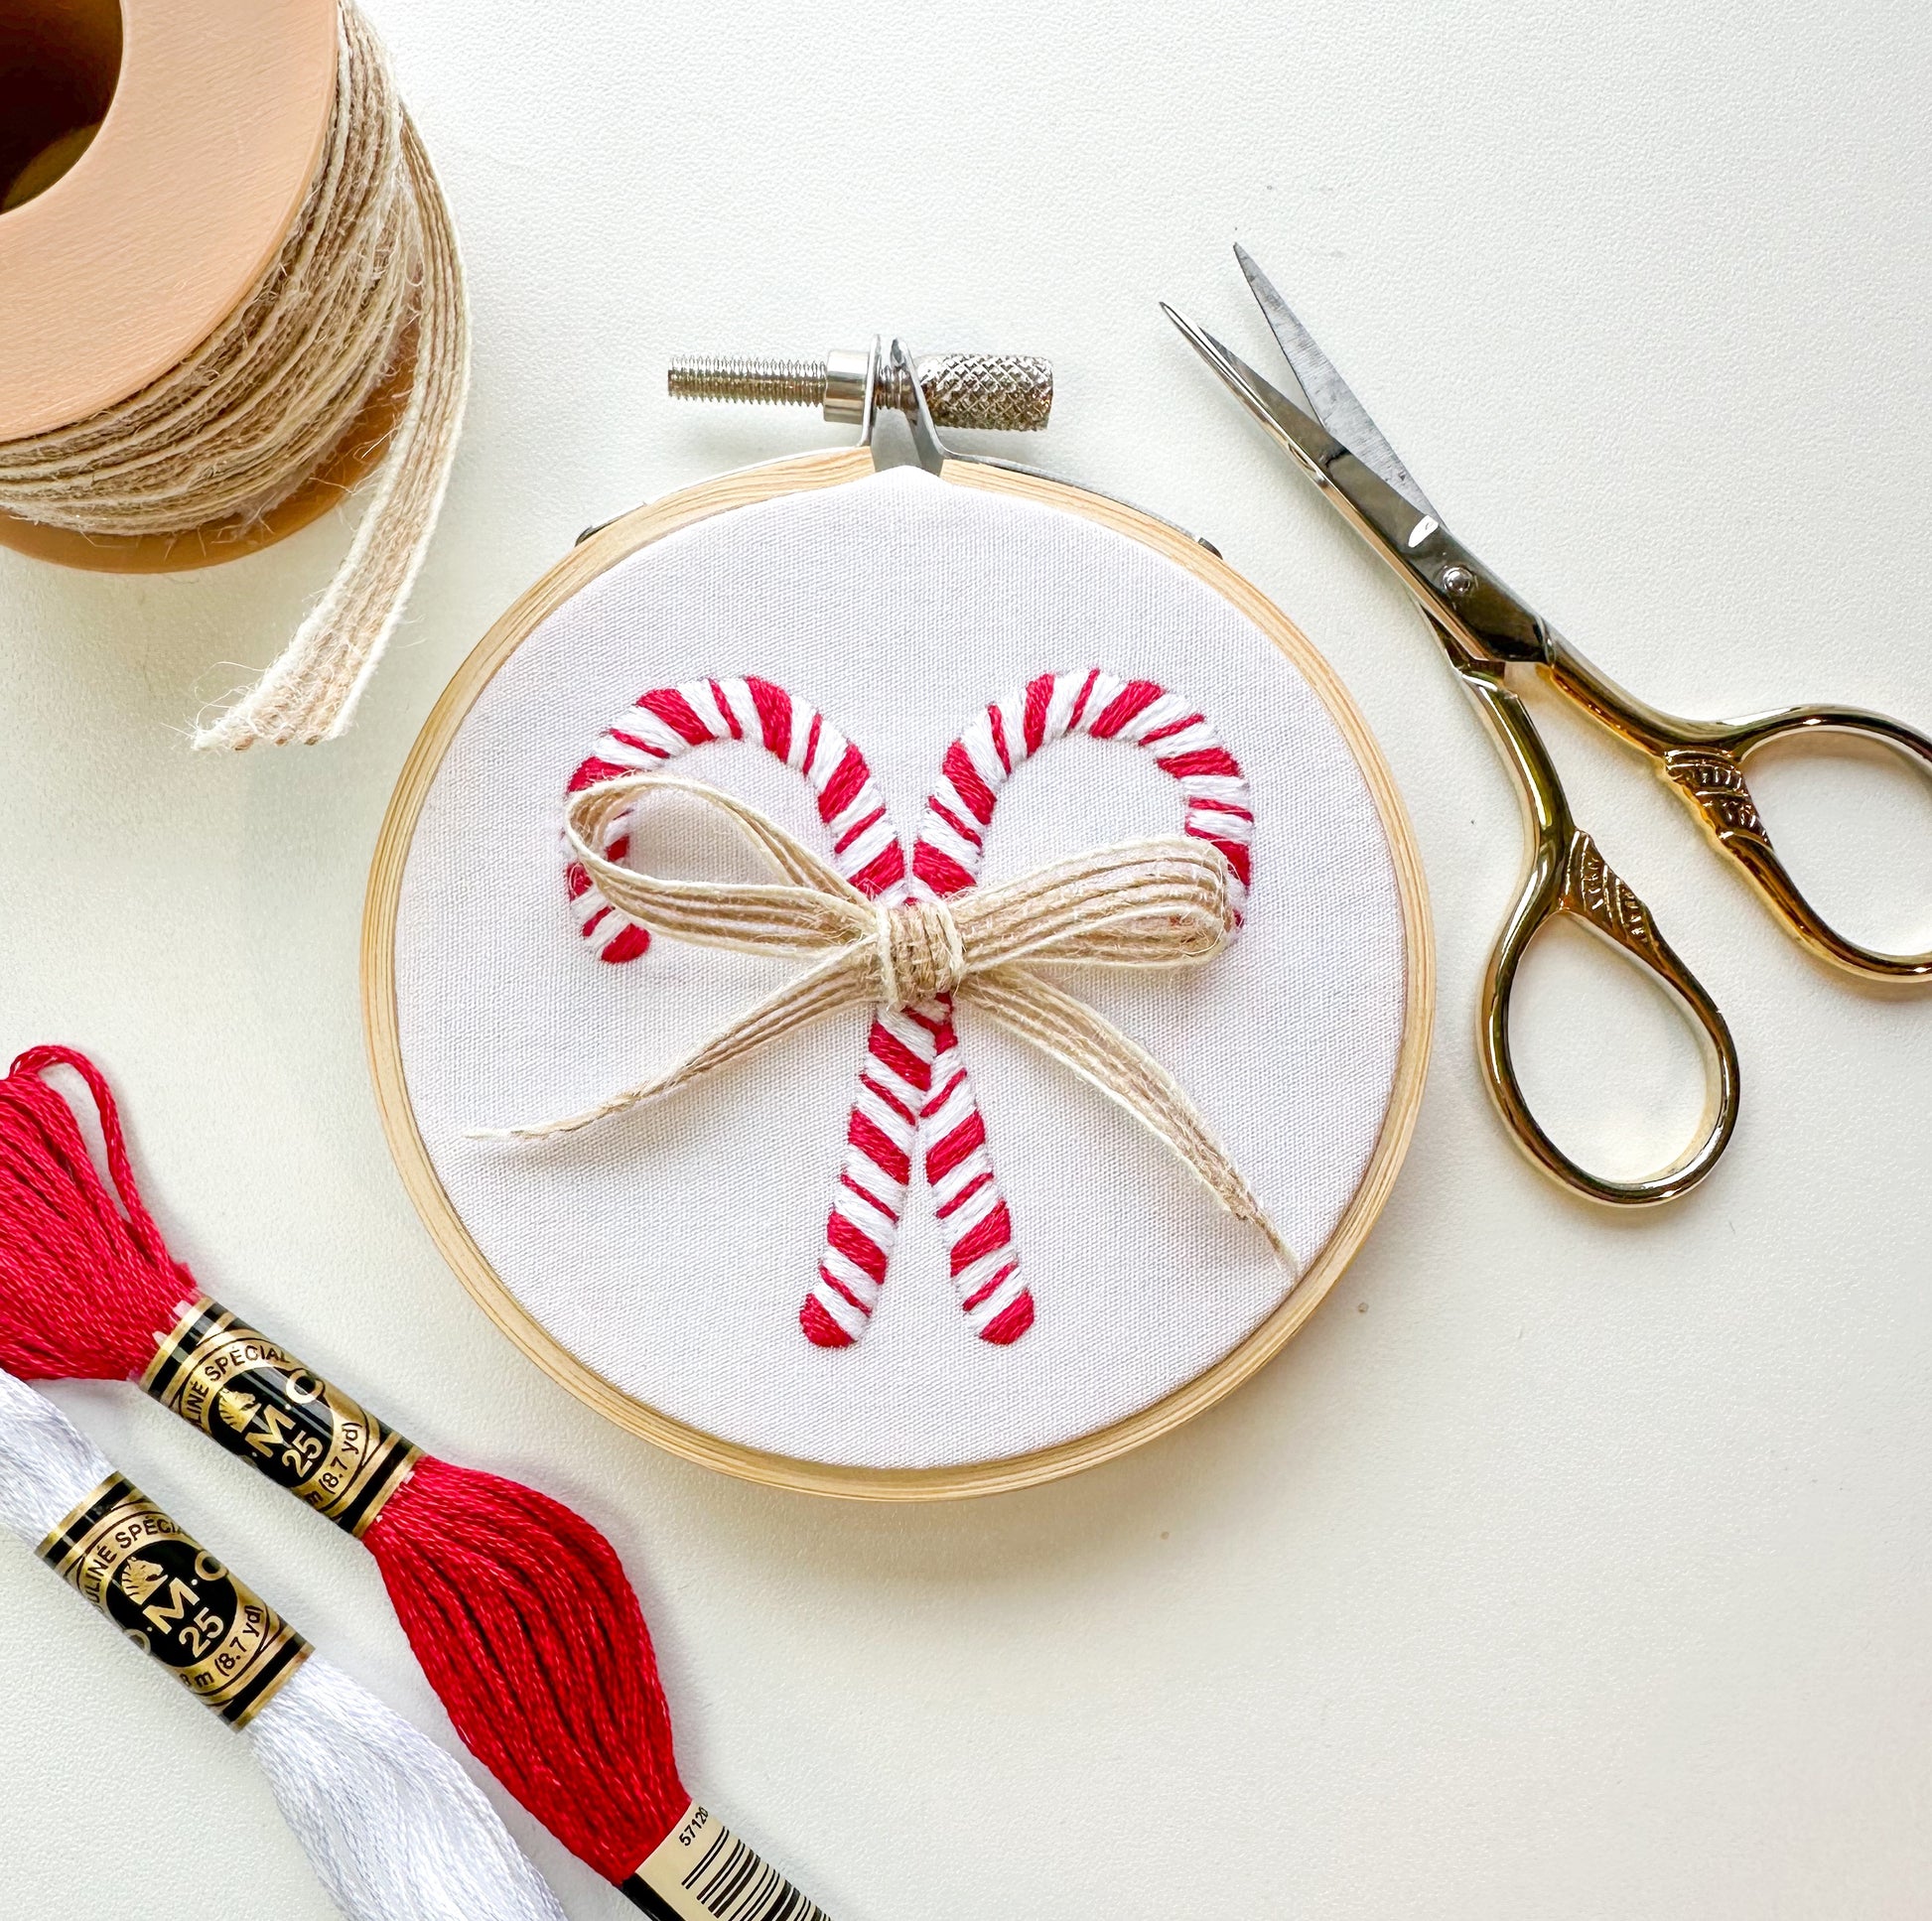 Candy Cane Embroidery Kit